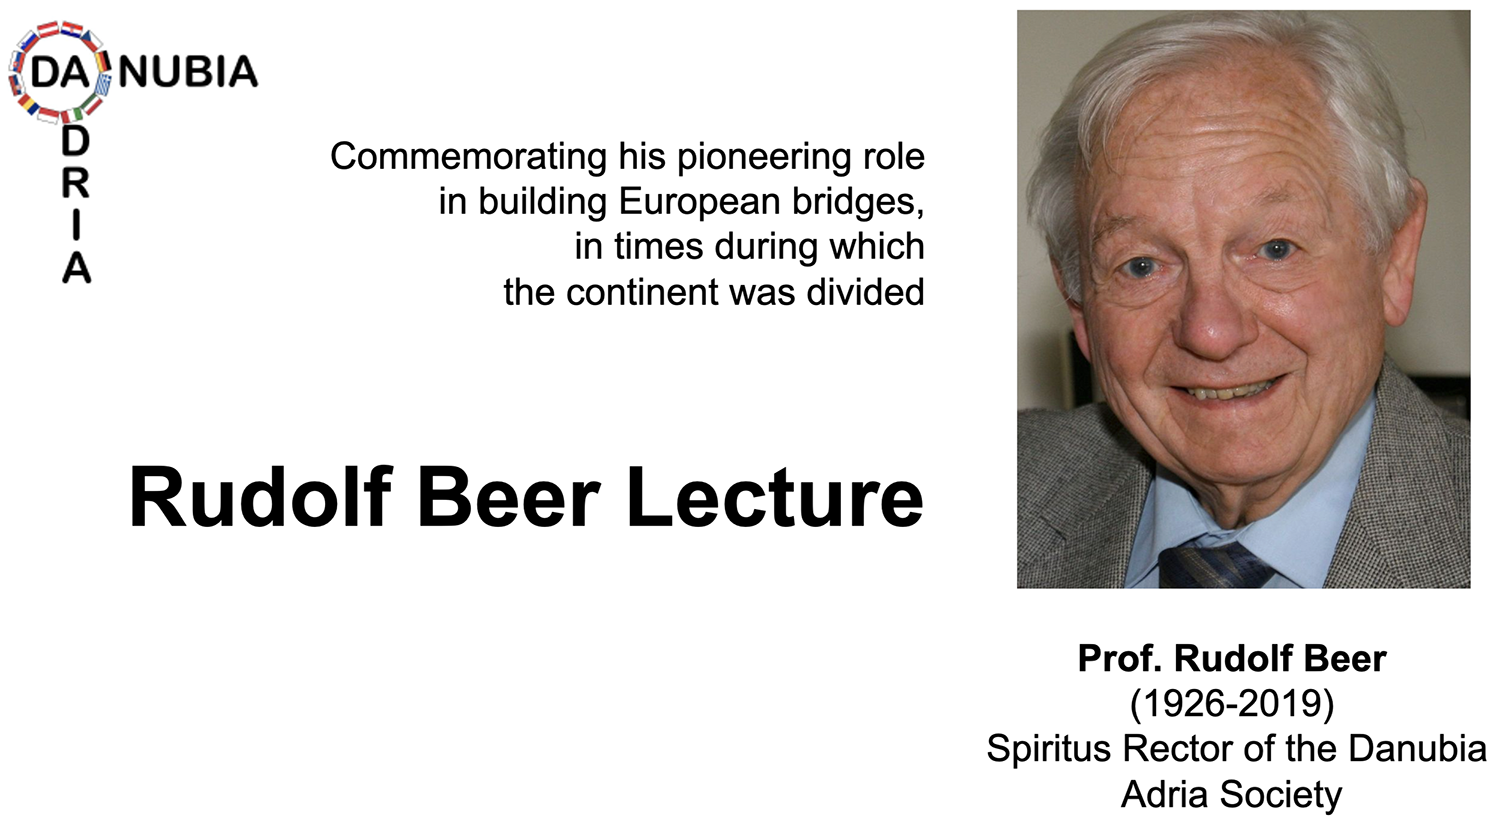 Announcement of Rudolf Beer Lecture